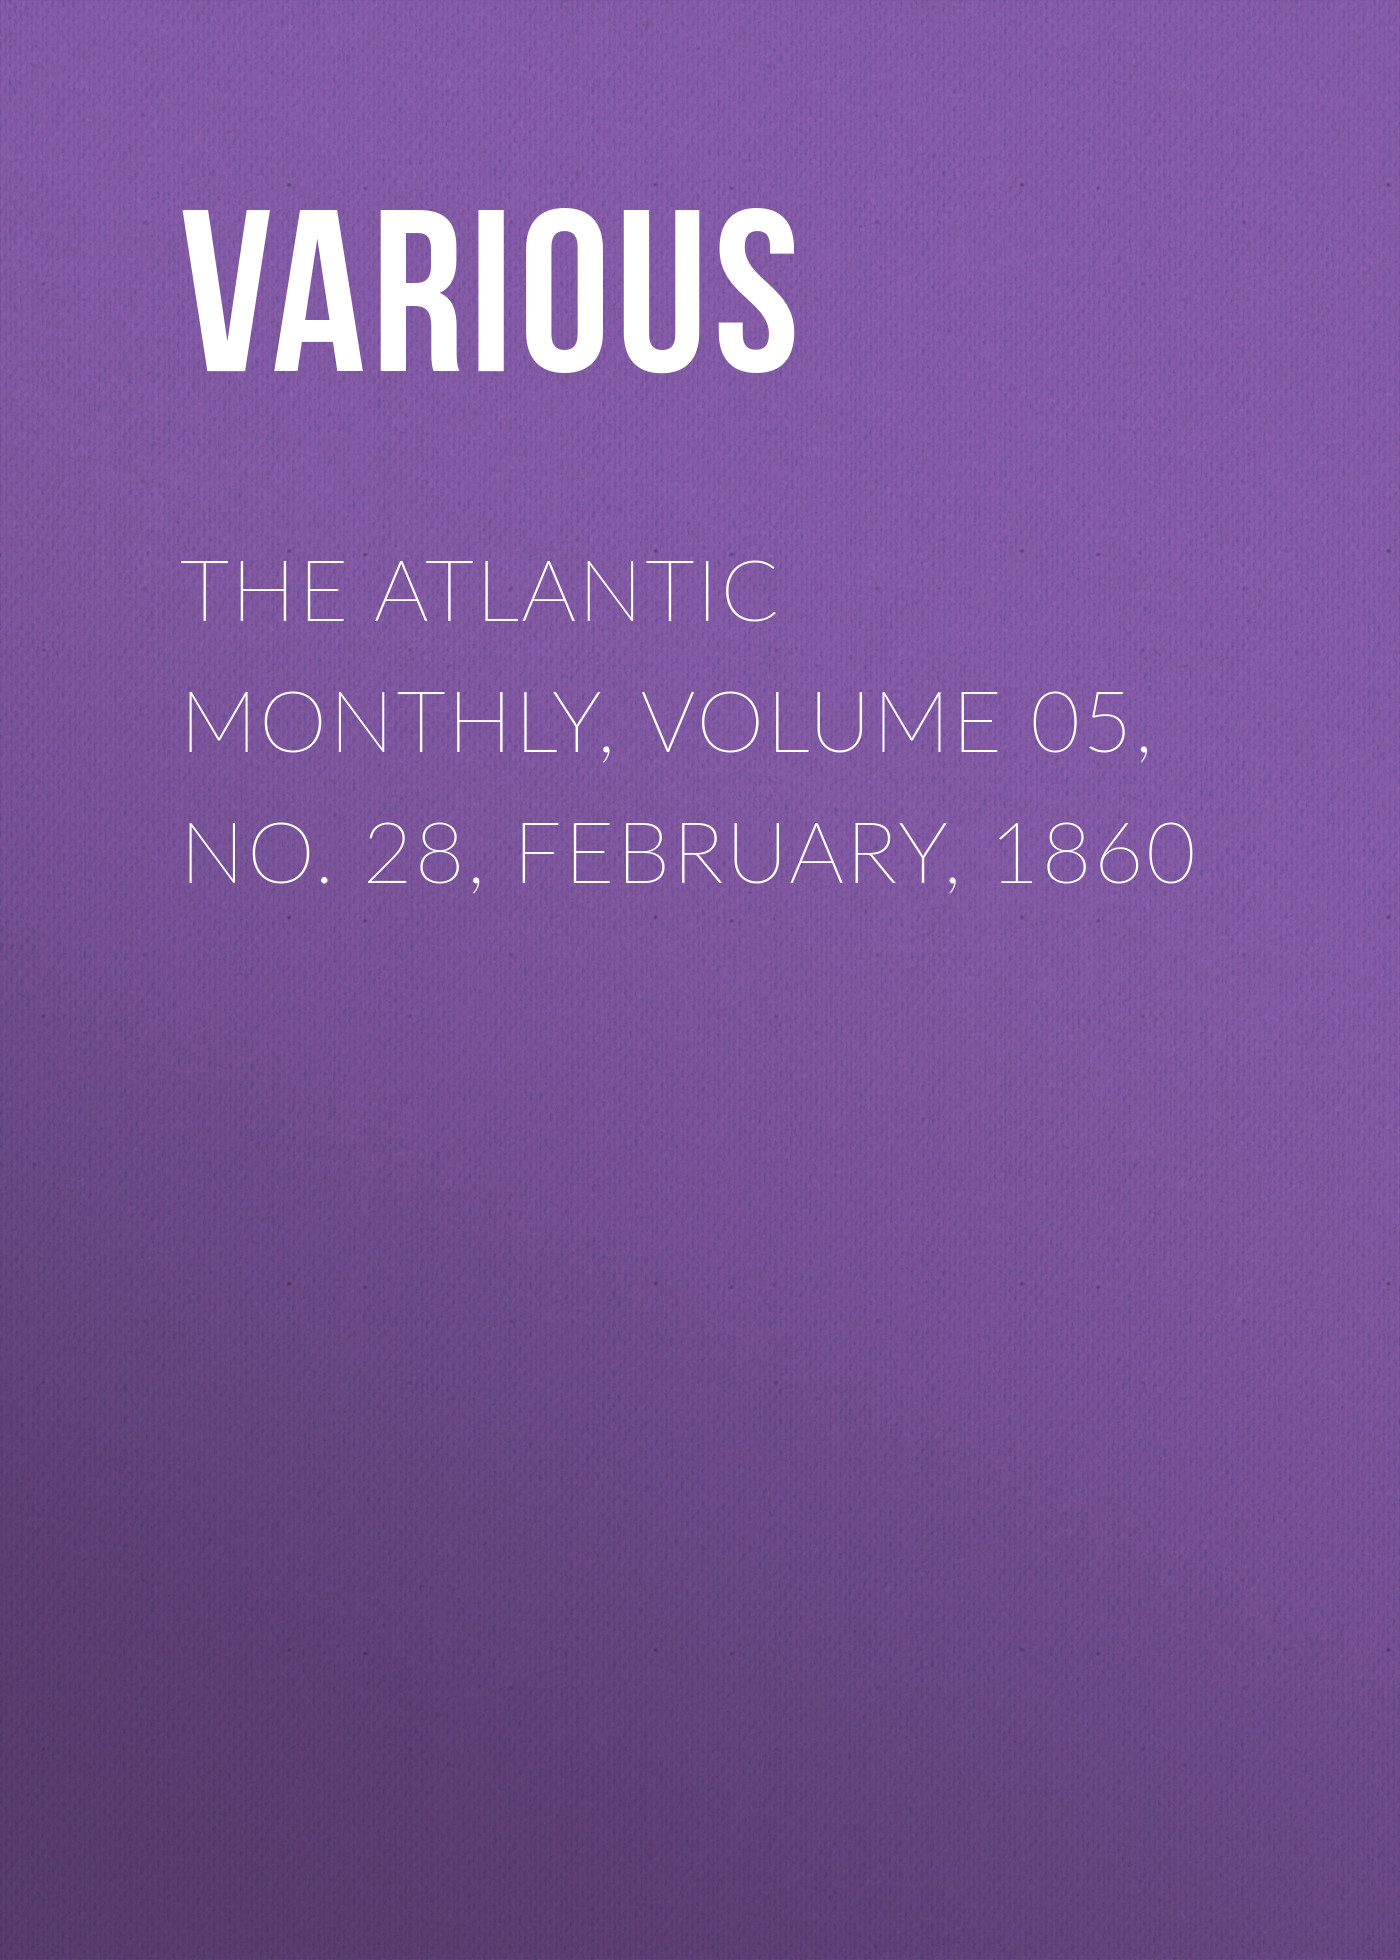 Various The Atlantic Monthly, Volume 05, No. 28, February, 1860